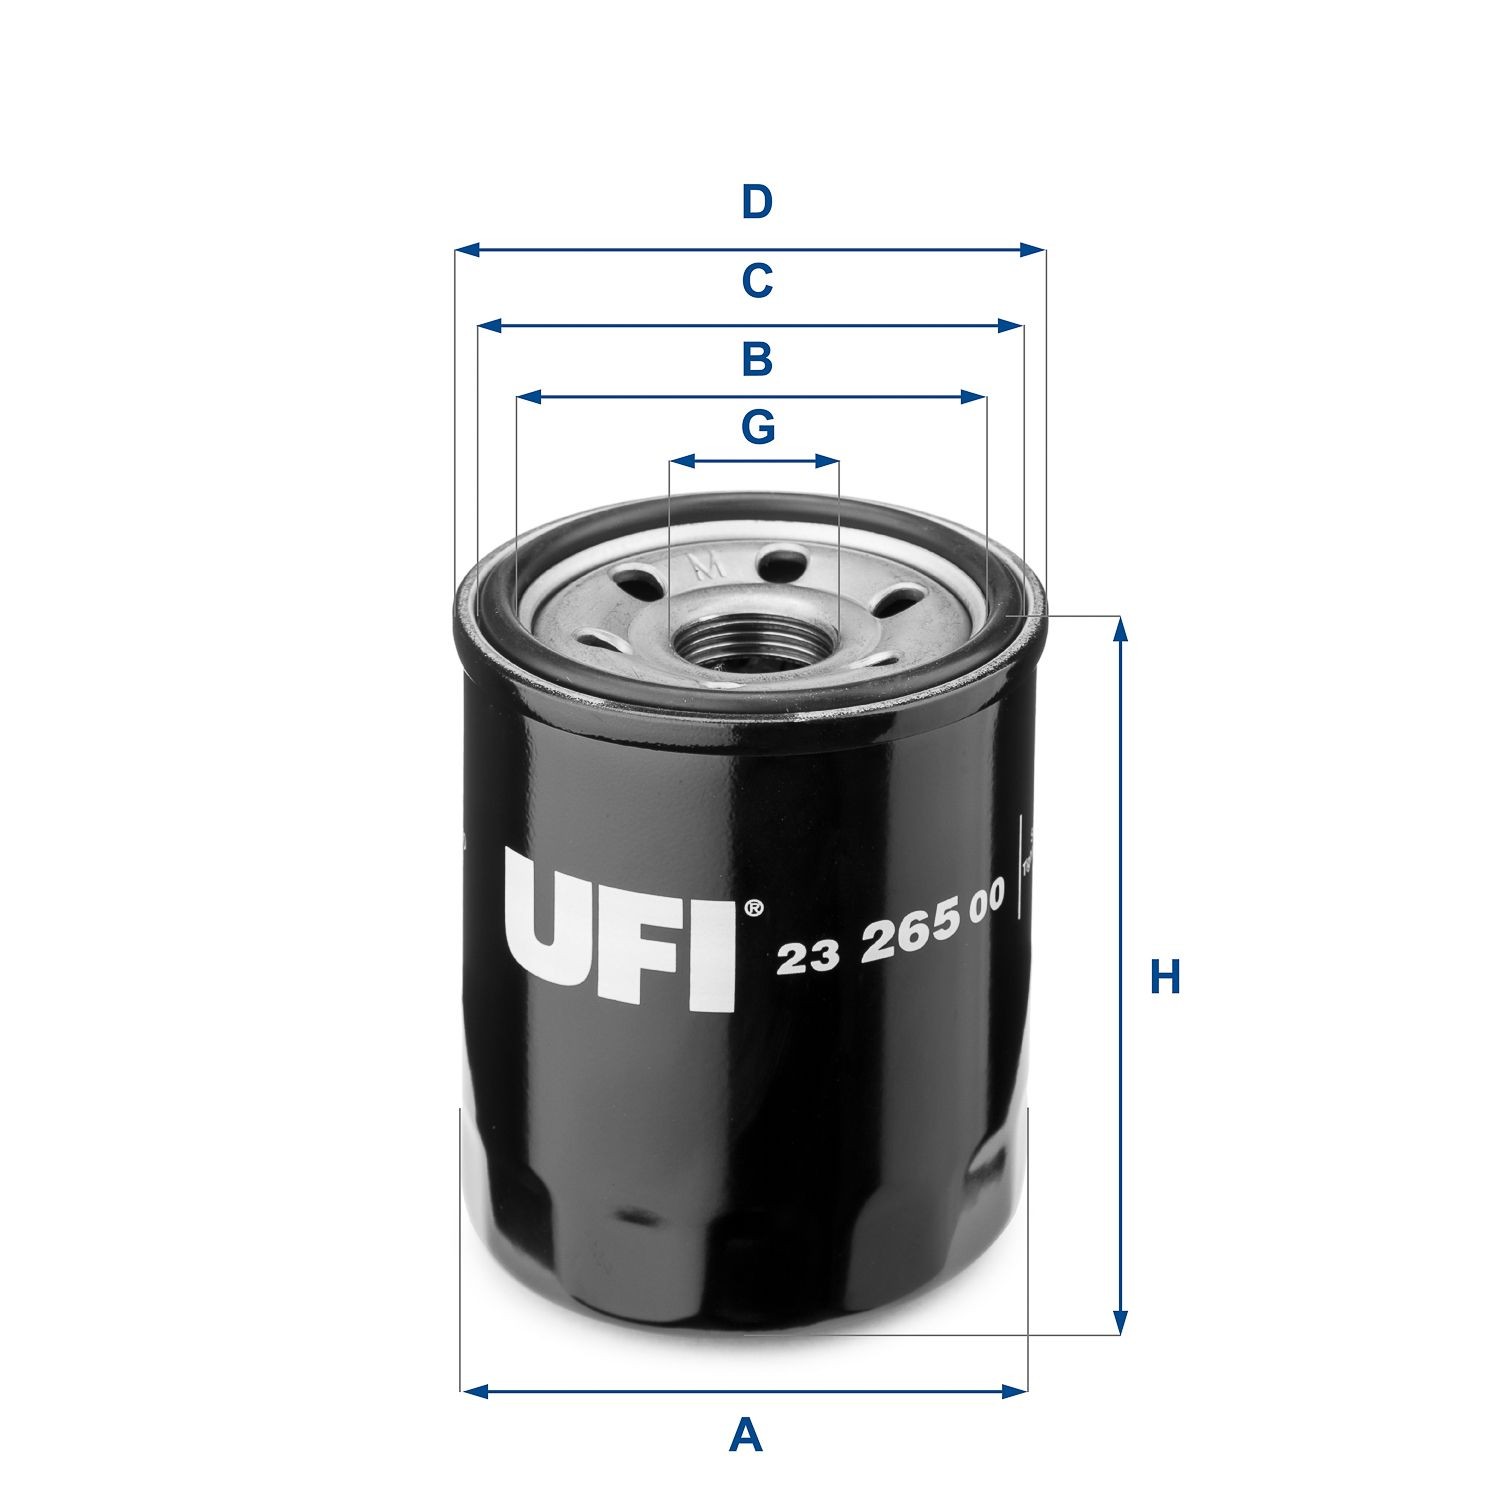 23.265.00 Oil filter 23.265.00 UFI M 20 X 1,5, with one anti-return valve, Spin-on Filter